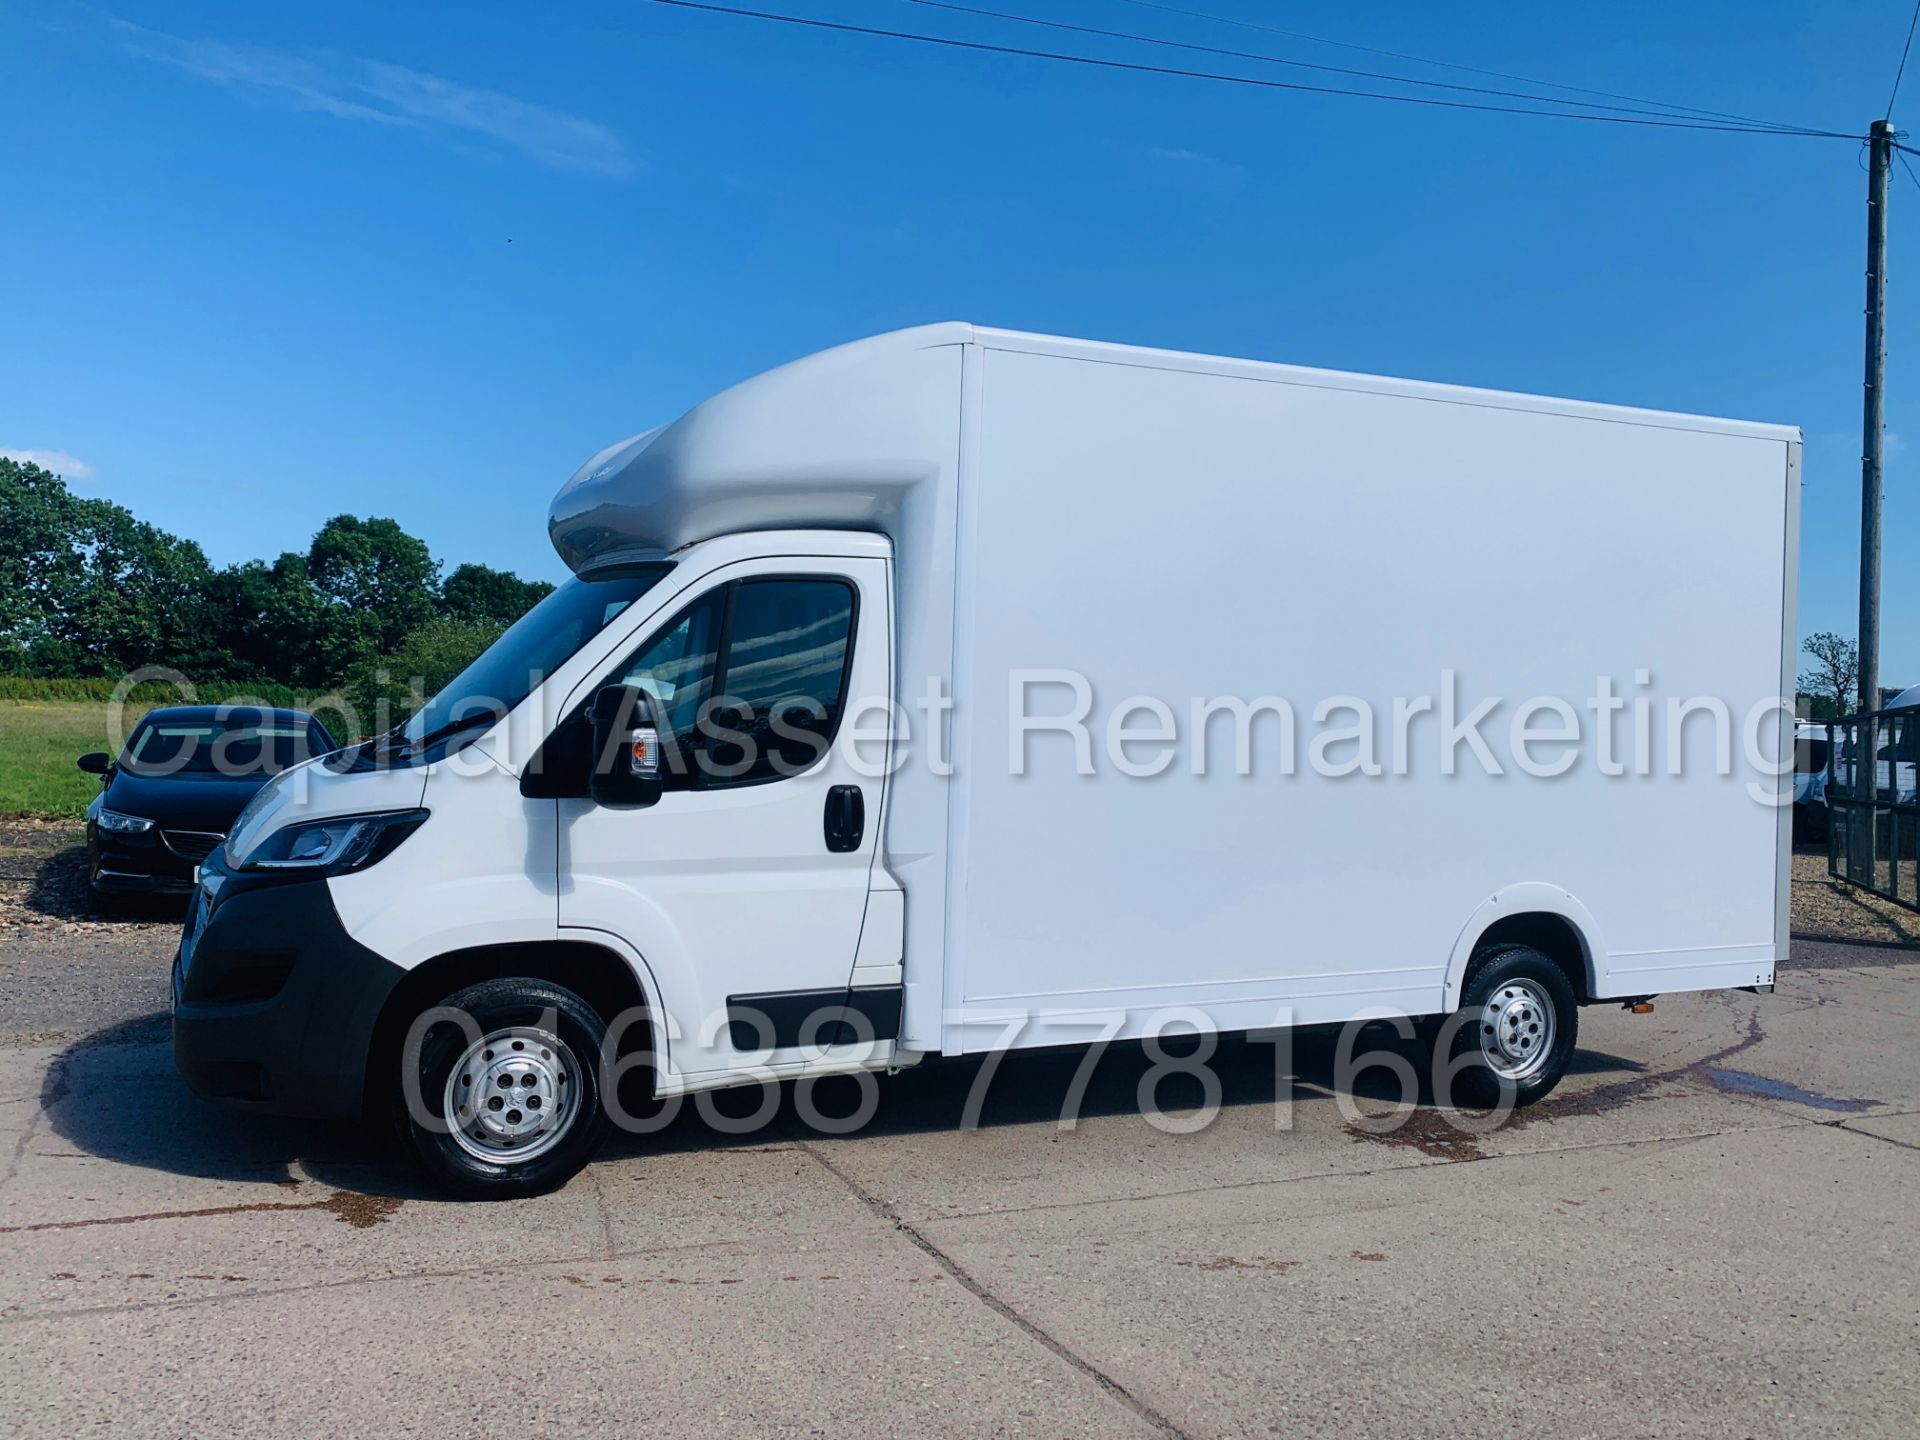 ON SALE PEUGEOT BOXER *LWB- LO-LOADER / LUTON* (2017 - EURO 6) '2.2 HDI - 6 SPEED' (1 OWNER - FSH - Image 7 of 35